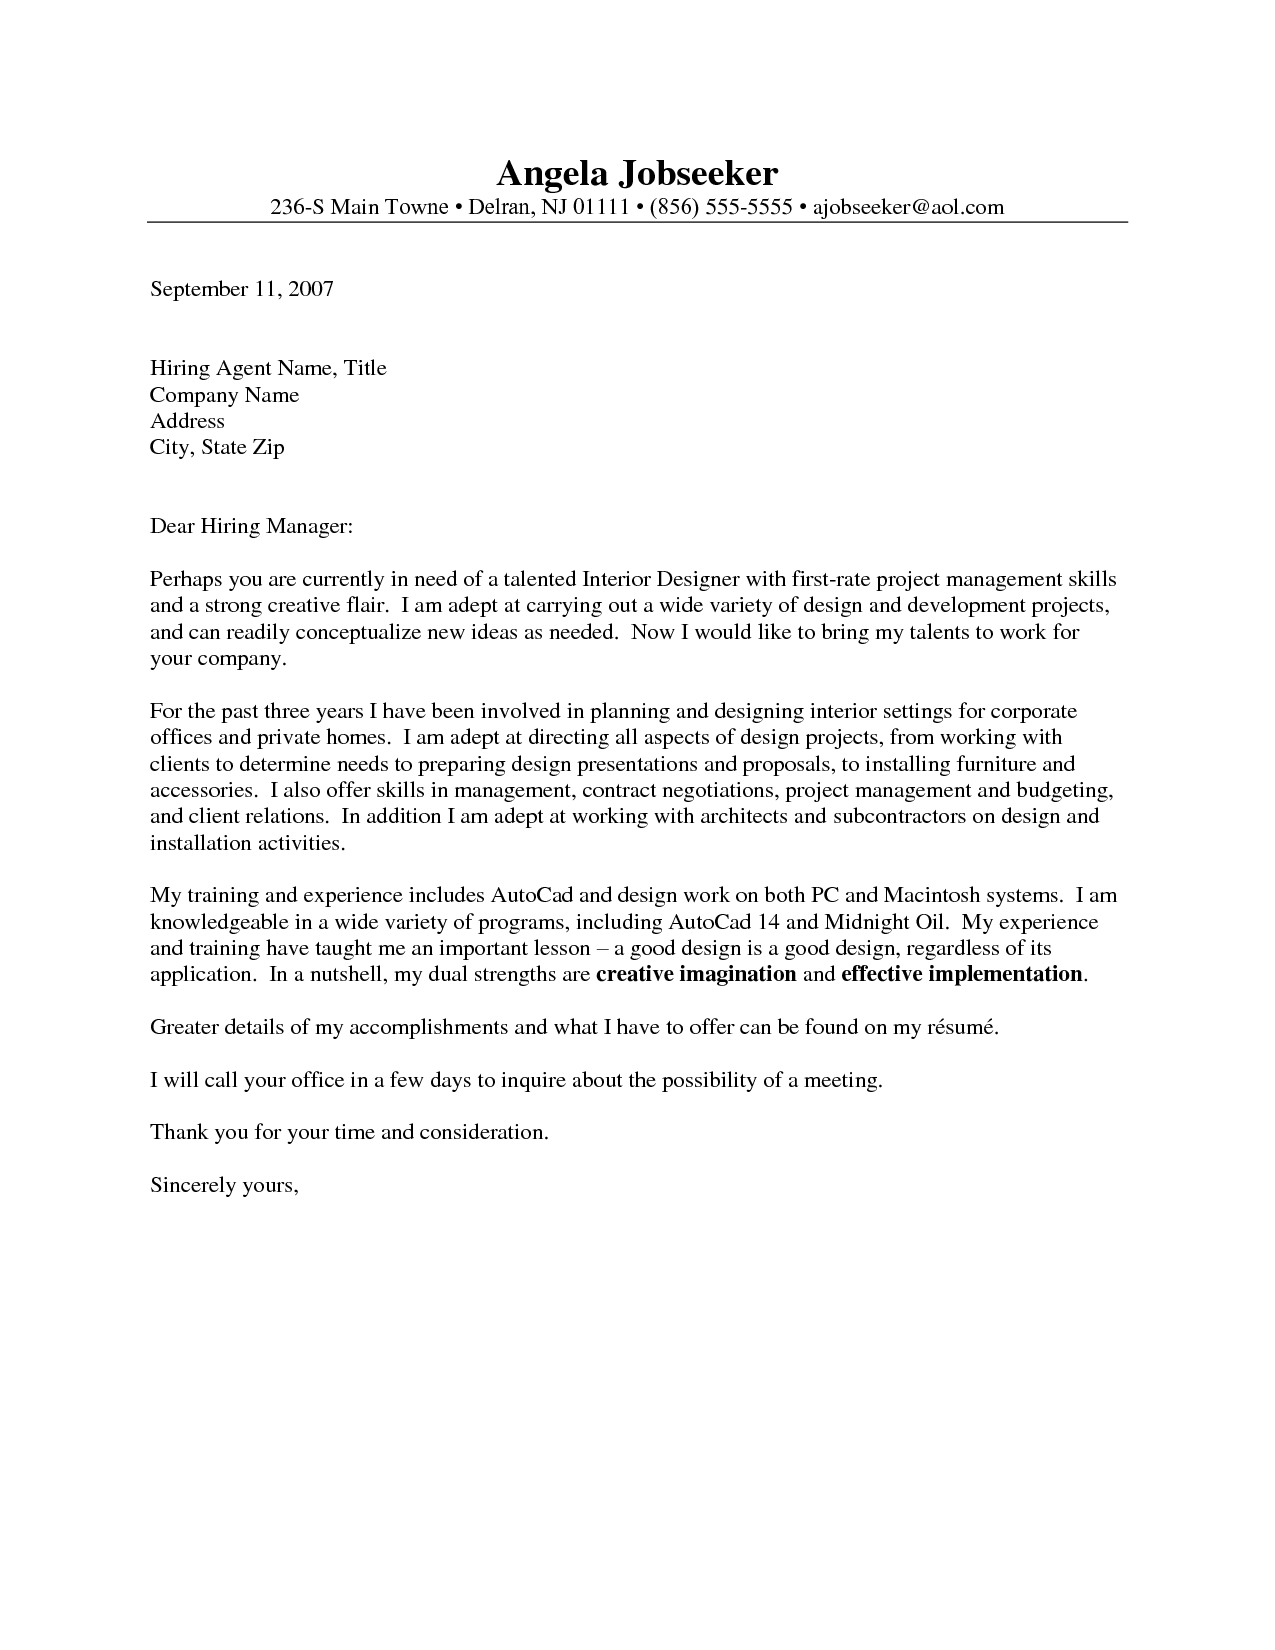 Interior Design Letter Of Agreement Template - Outstanding Cover Letter Examples